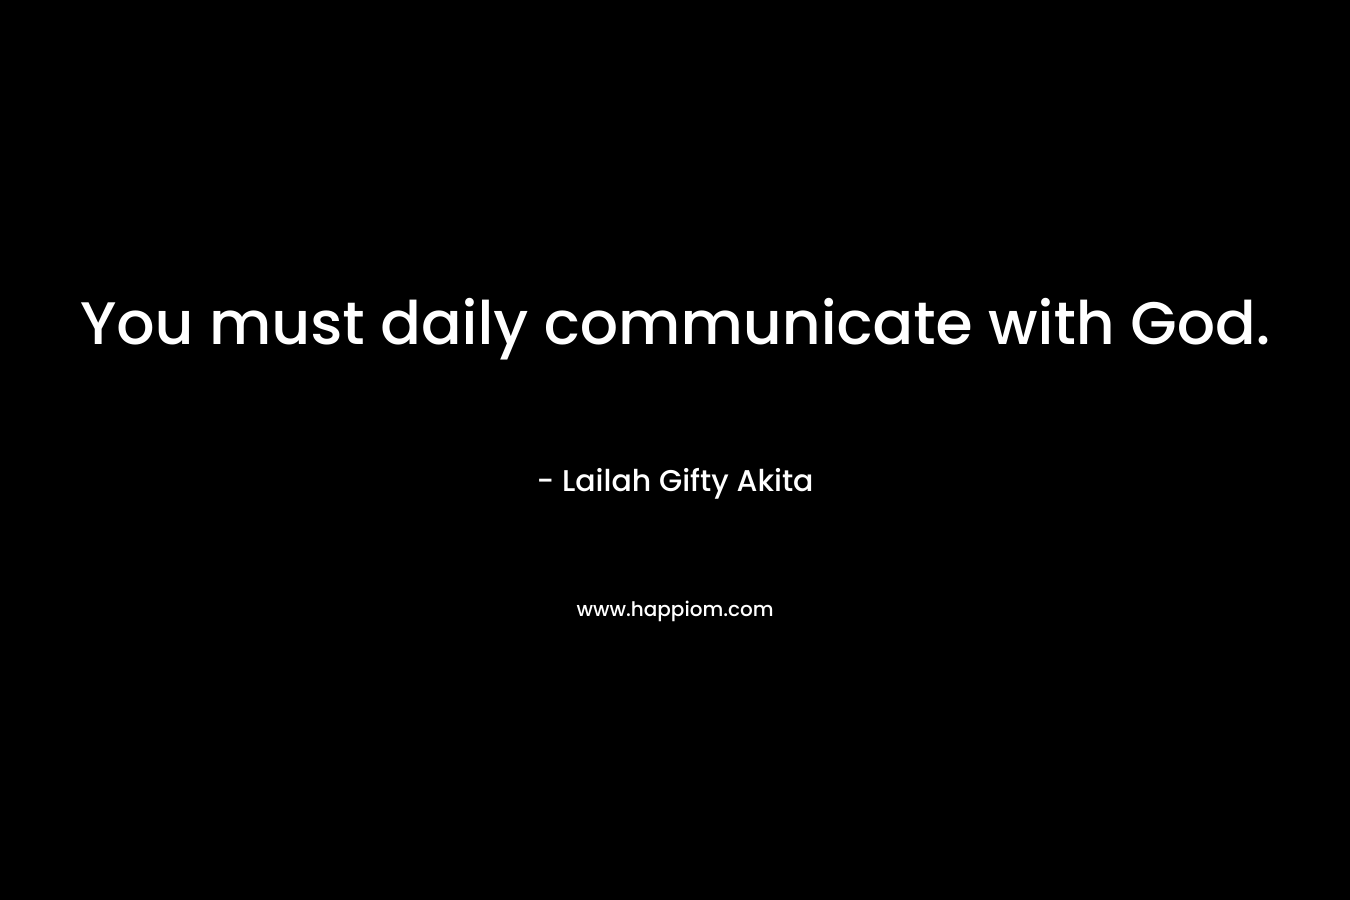 You must daily communicate with God.